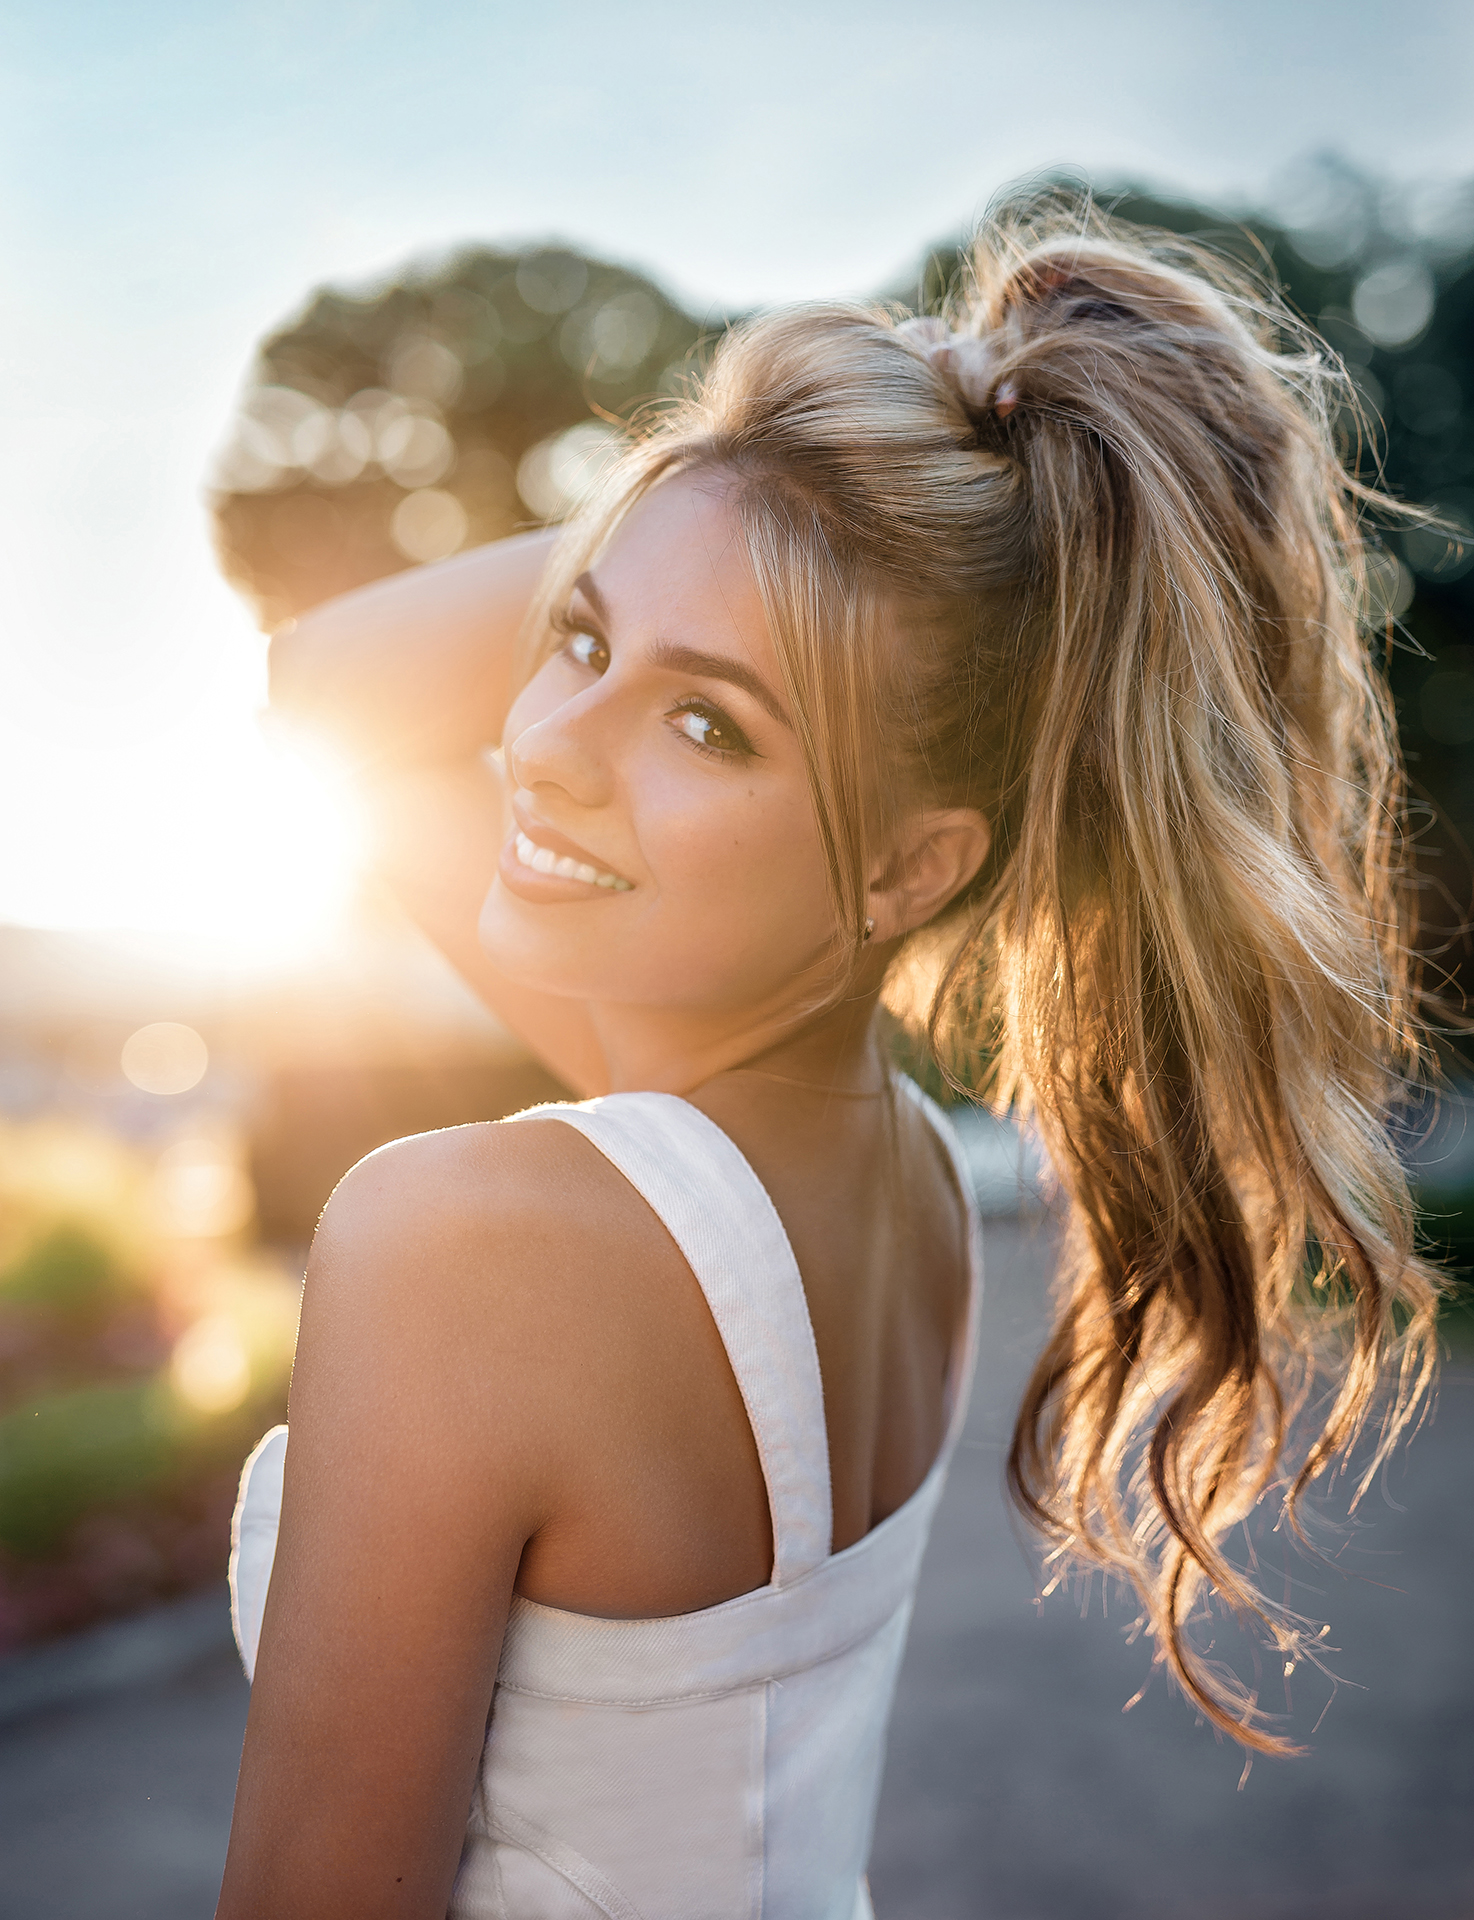 People 1474x1920 Aleksandr Smirnov women blonde long hair ponytail wavy hair hands in hair makeup eyeliner looking at viewer lipstick smiling white clothing sunlight bright lens flare Sun looking back tanned